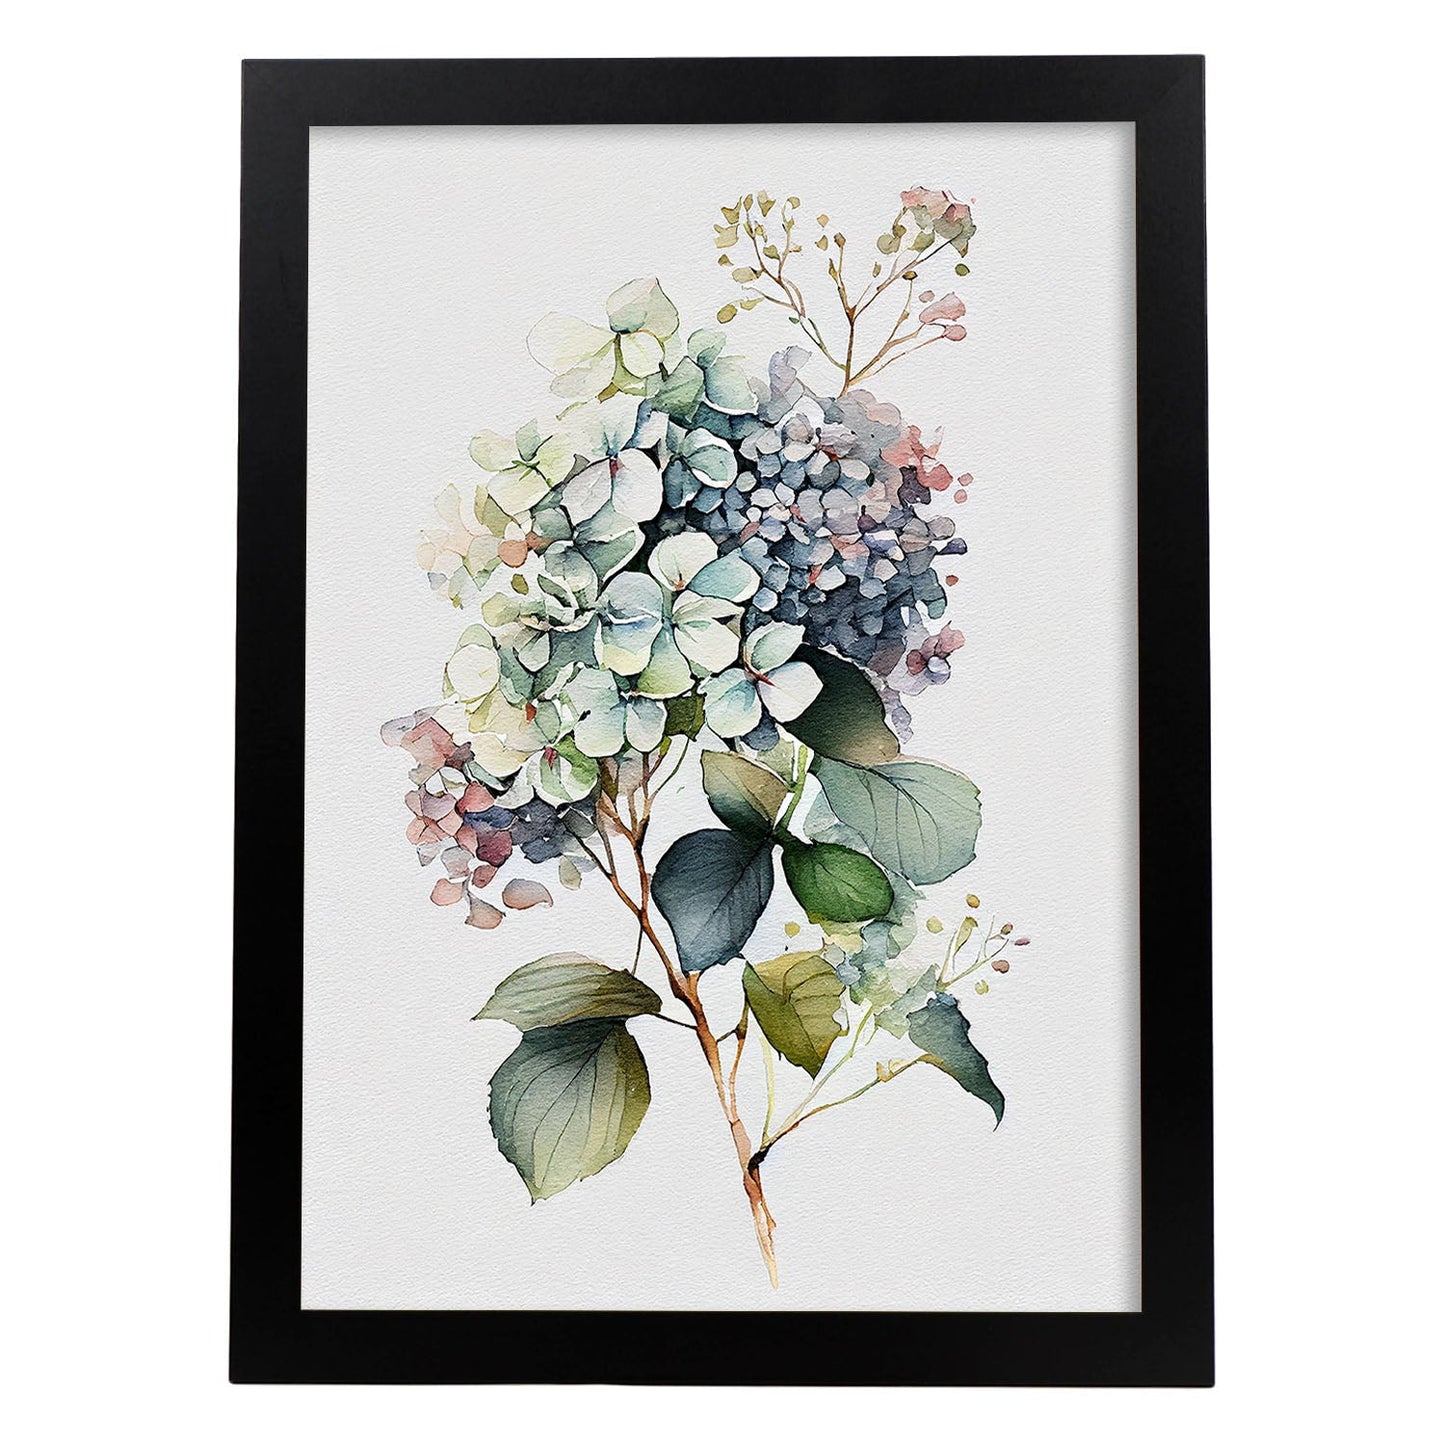 Nacnic watercolor minmal Hydrangea_1. Aesthetic Wall Art Prints for Bedroom or Living Room Design.